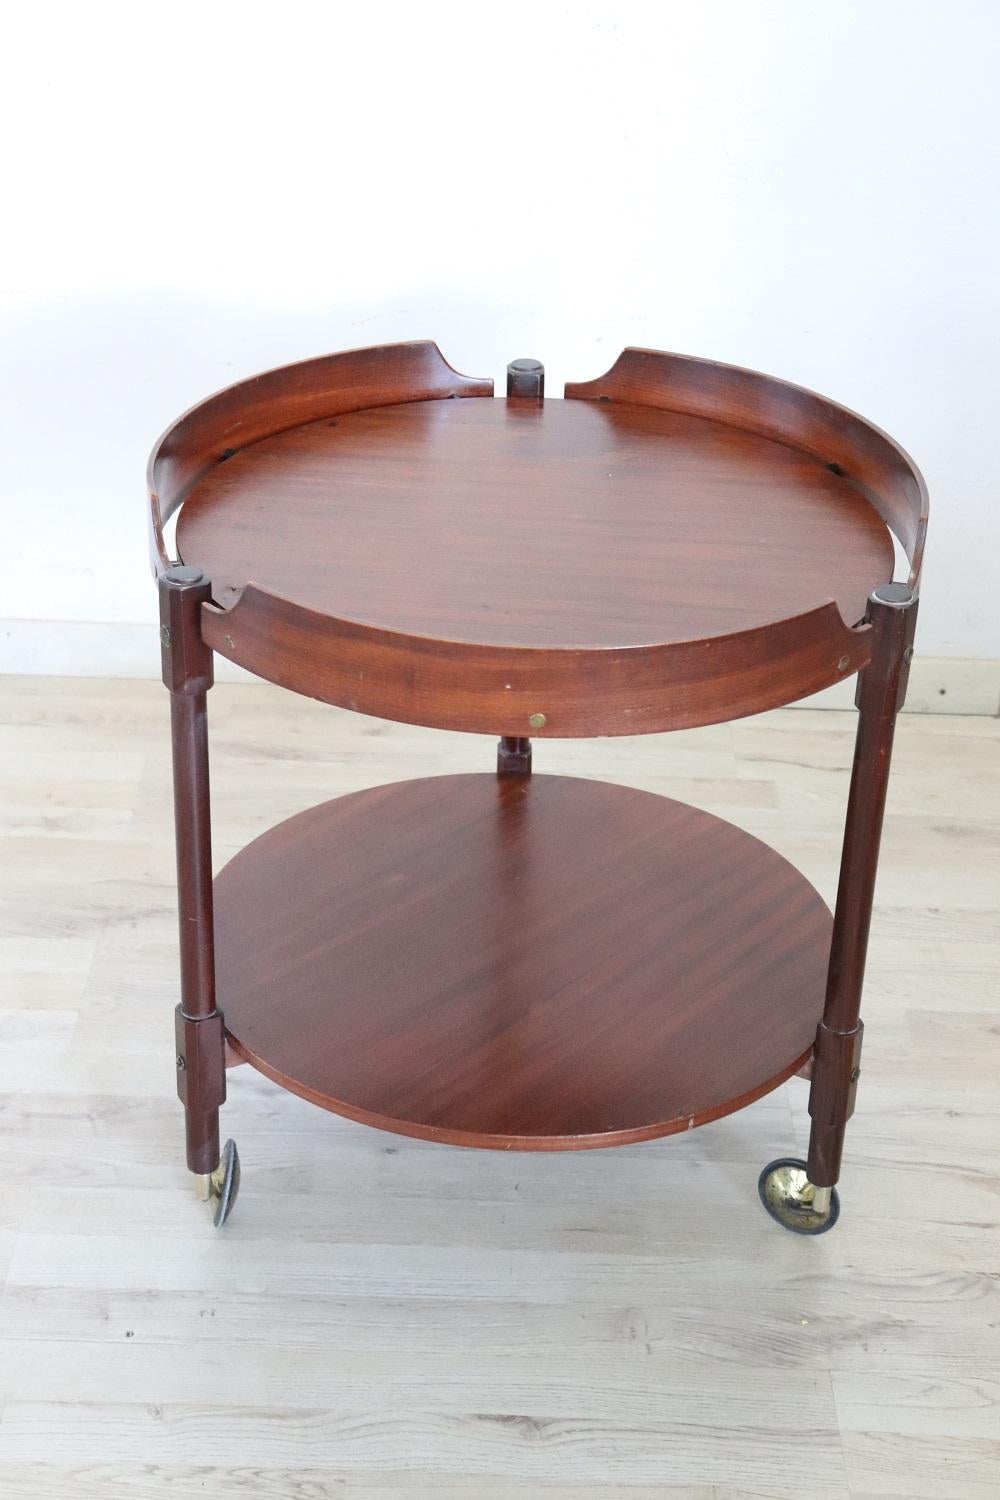 Rare 1950s Italian desgin serving bar cart. Made of teak wood equipped with two shelves and brass wheels for convenient movement. Perfect for serving drinks to your guests.